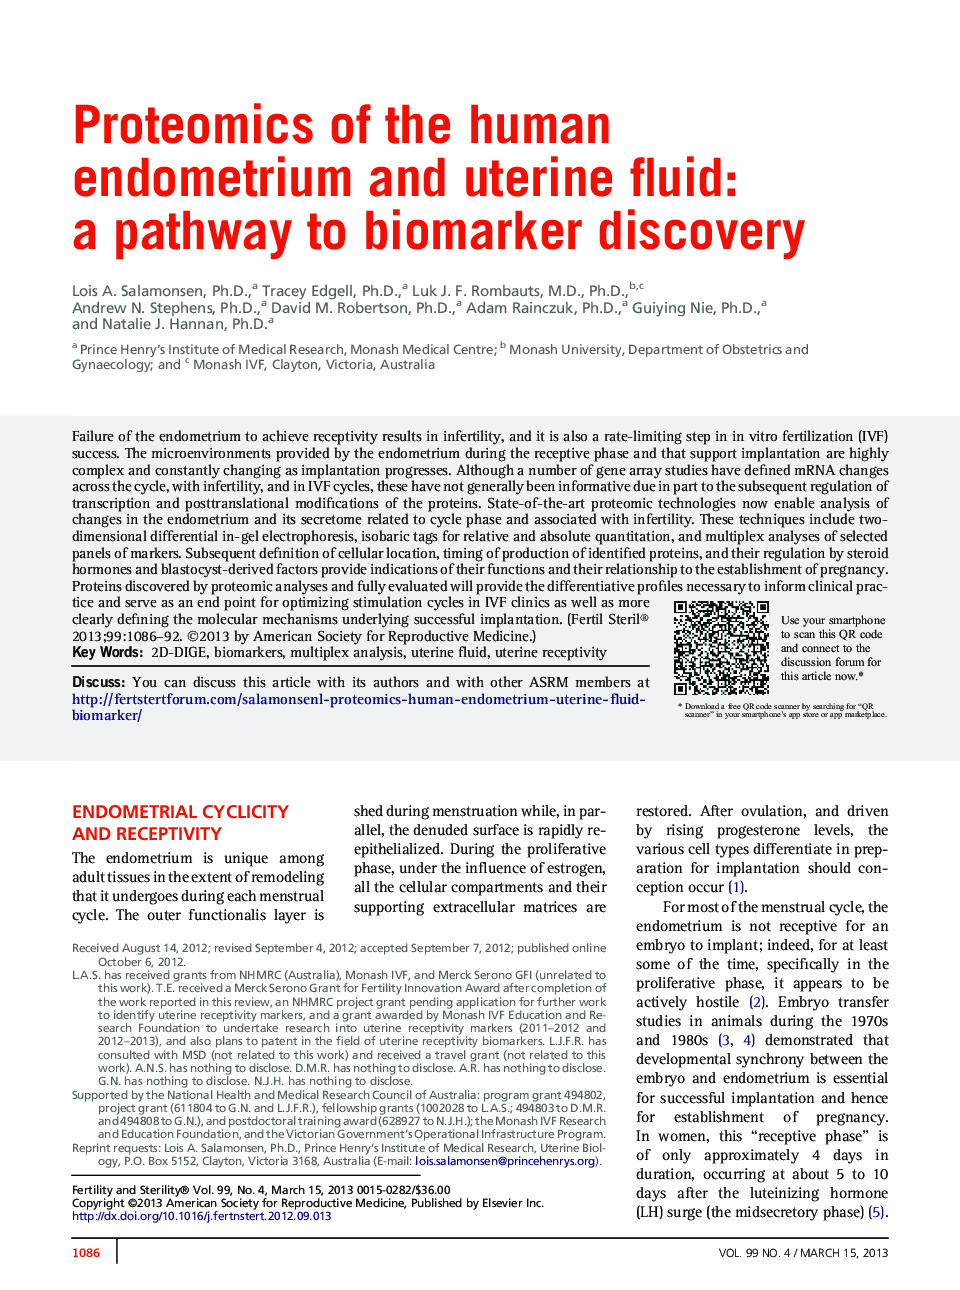 Proteomics of the human endometrium and uterine fluid: a pathway to biomarker discovery 